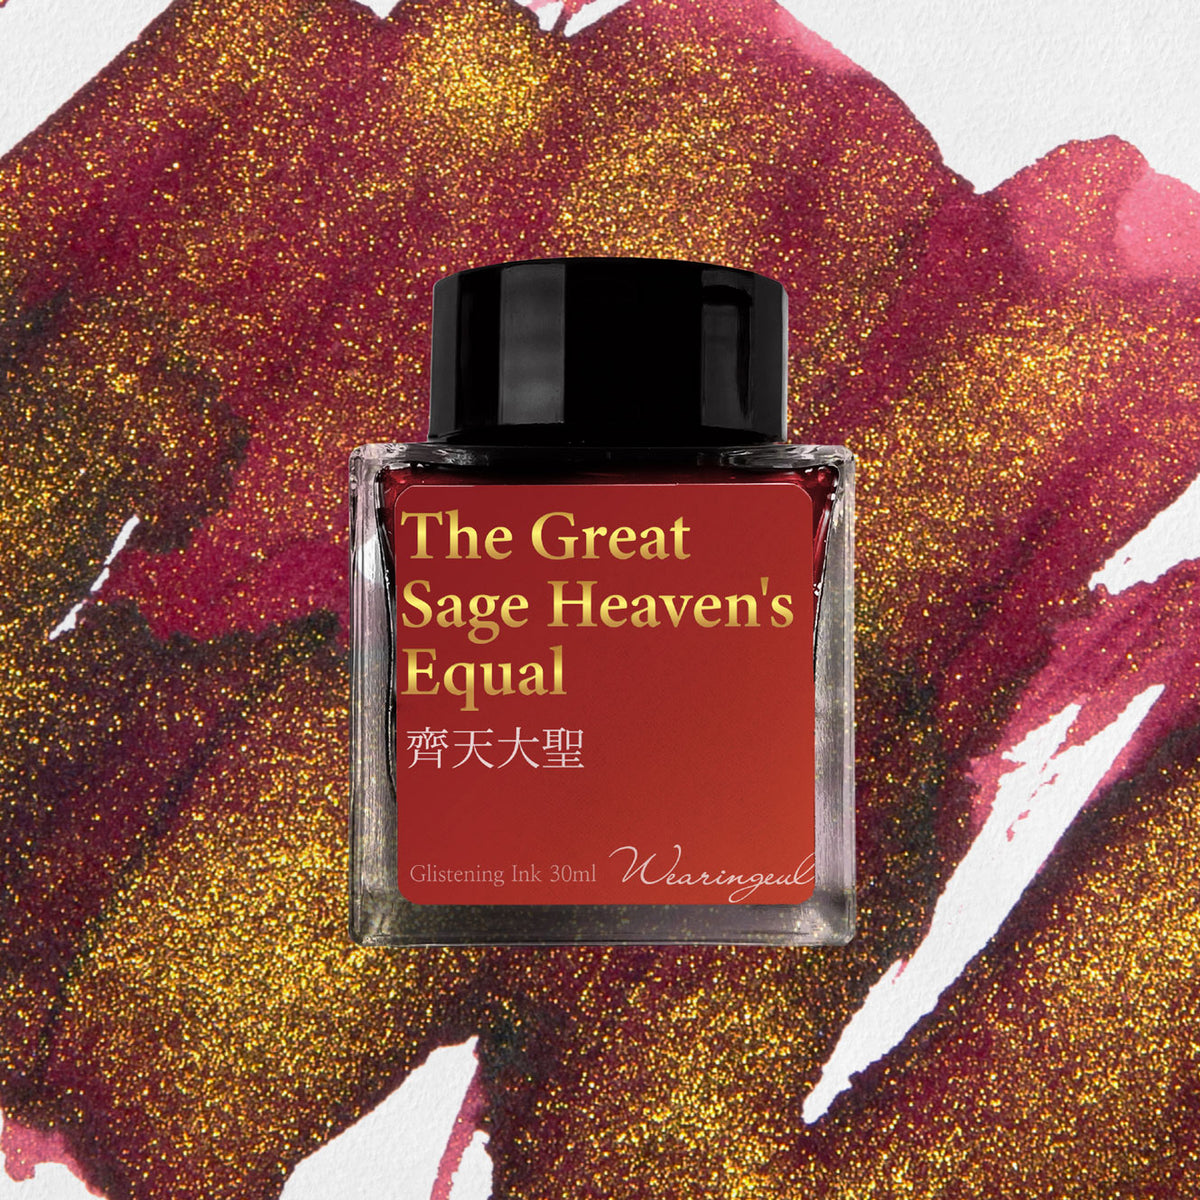 Wearingeul - Fountain Pen Ink - The Great Sage Heaven's Equal (Shimmer)